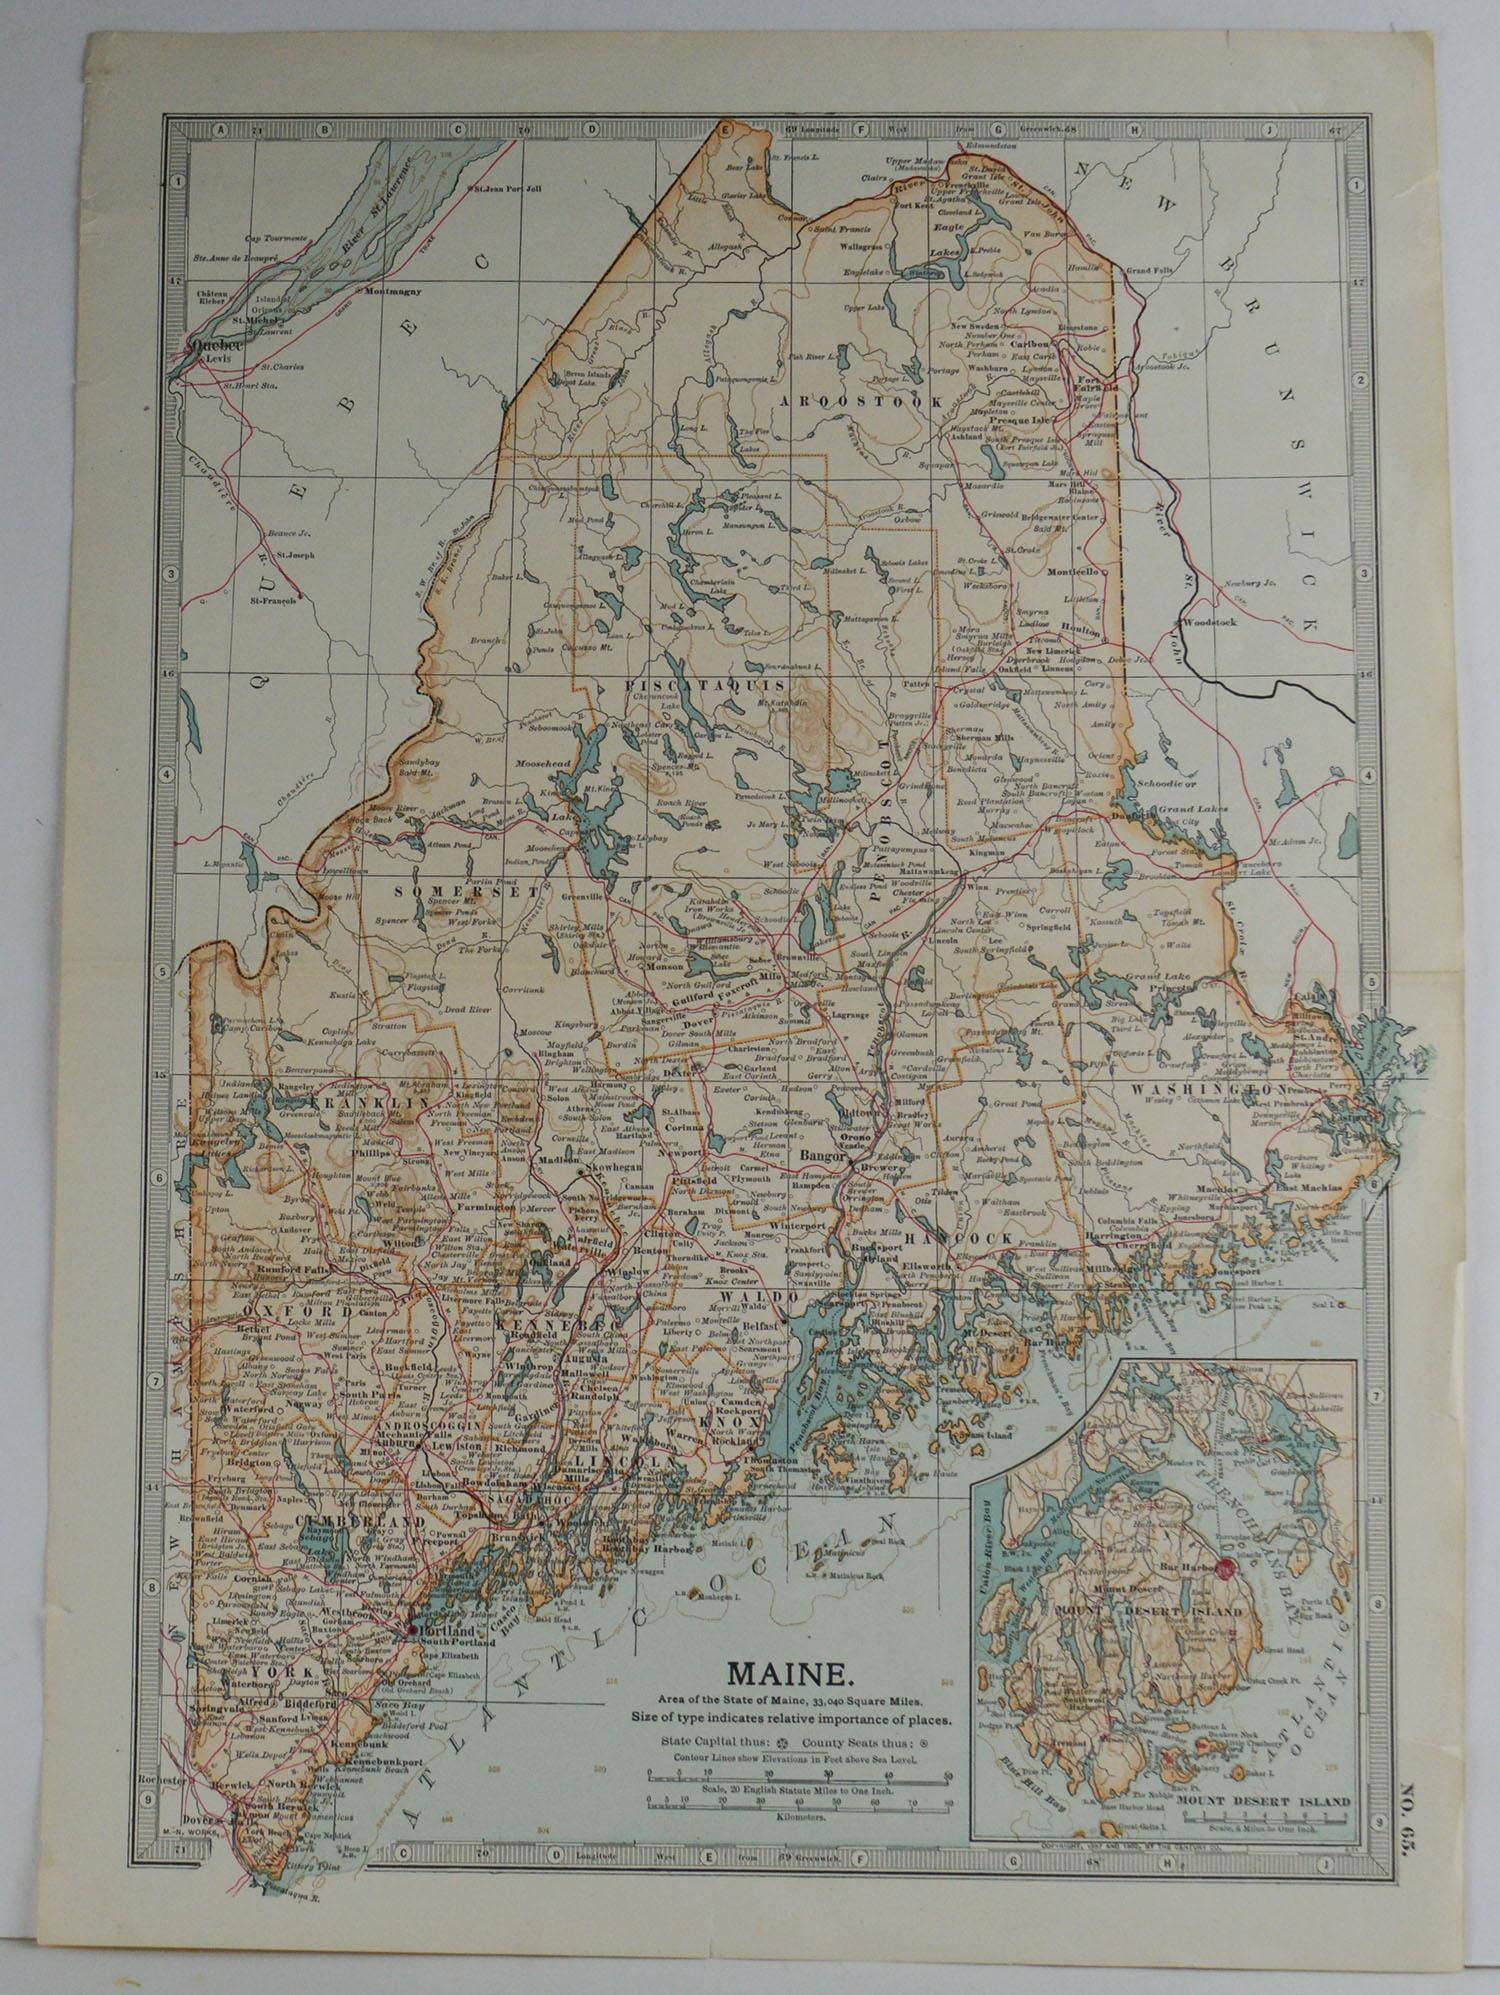 Great map of Maine

Original color.

Published: circa 1890

Repairs to few minor edge tears

Unframed.
 